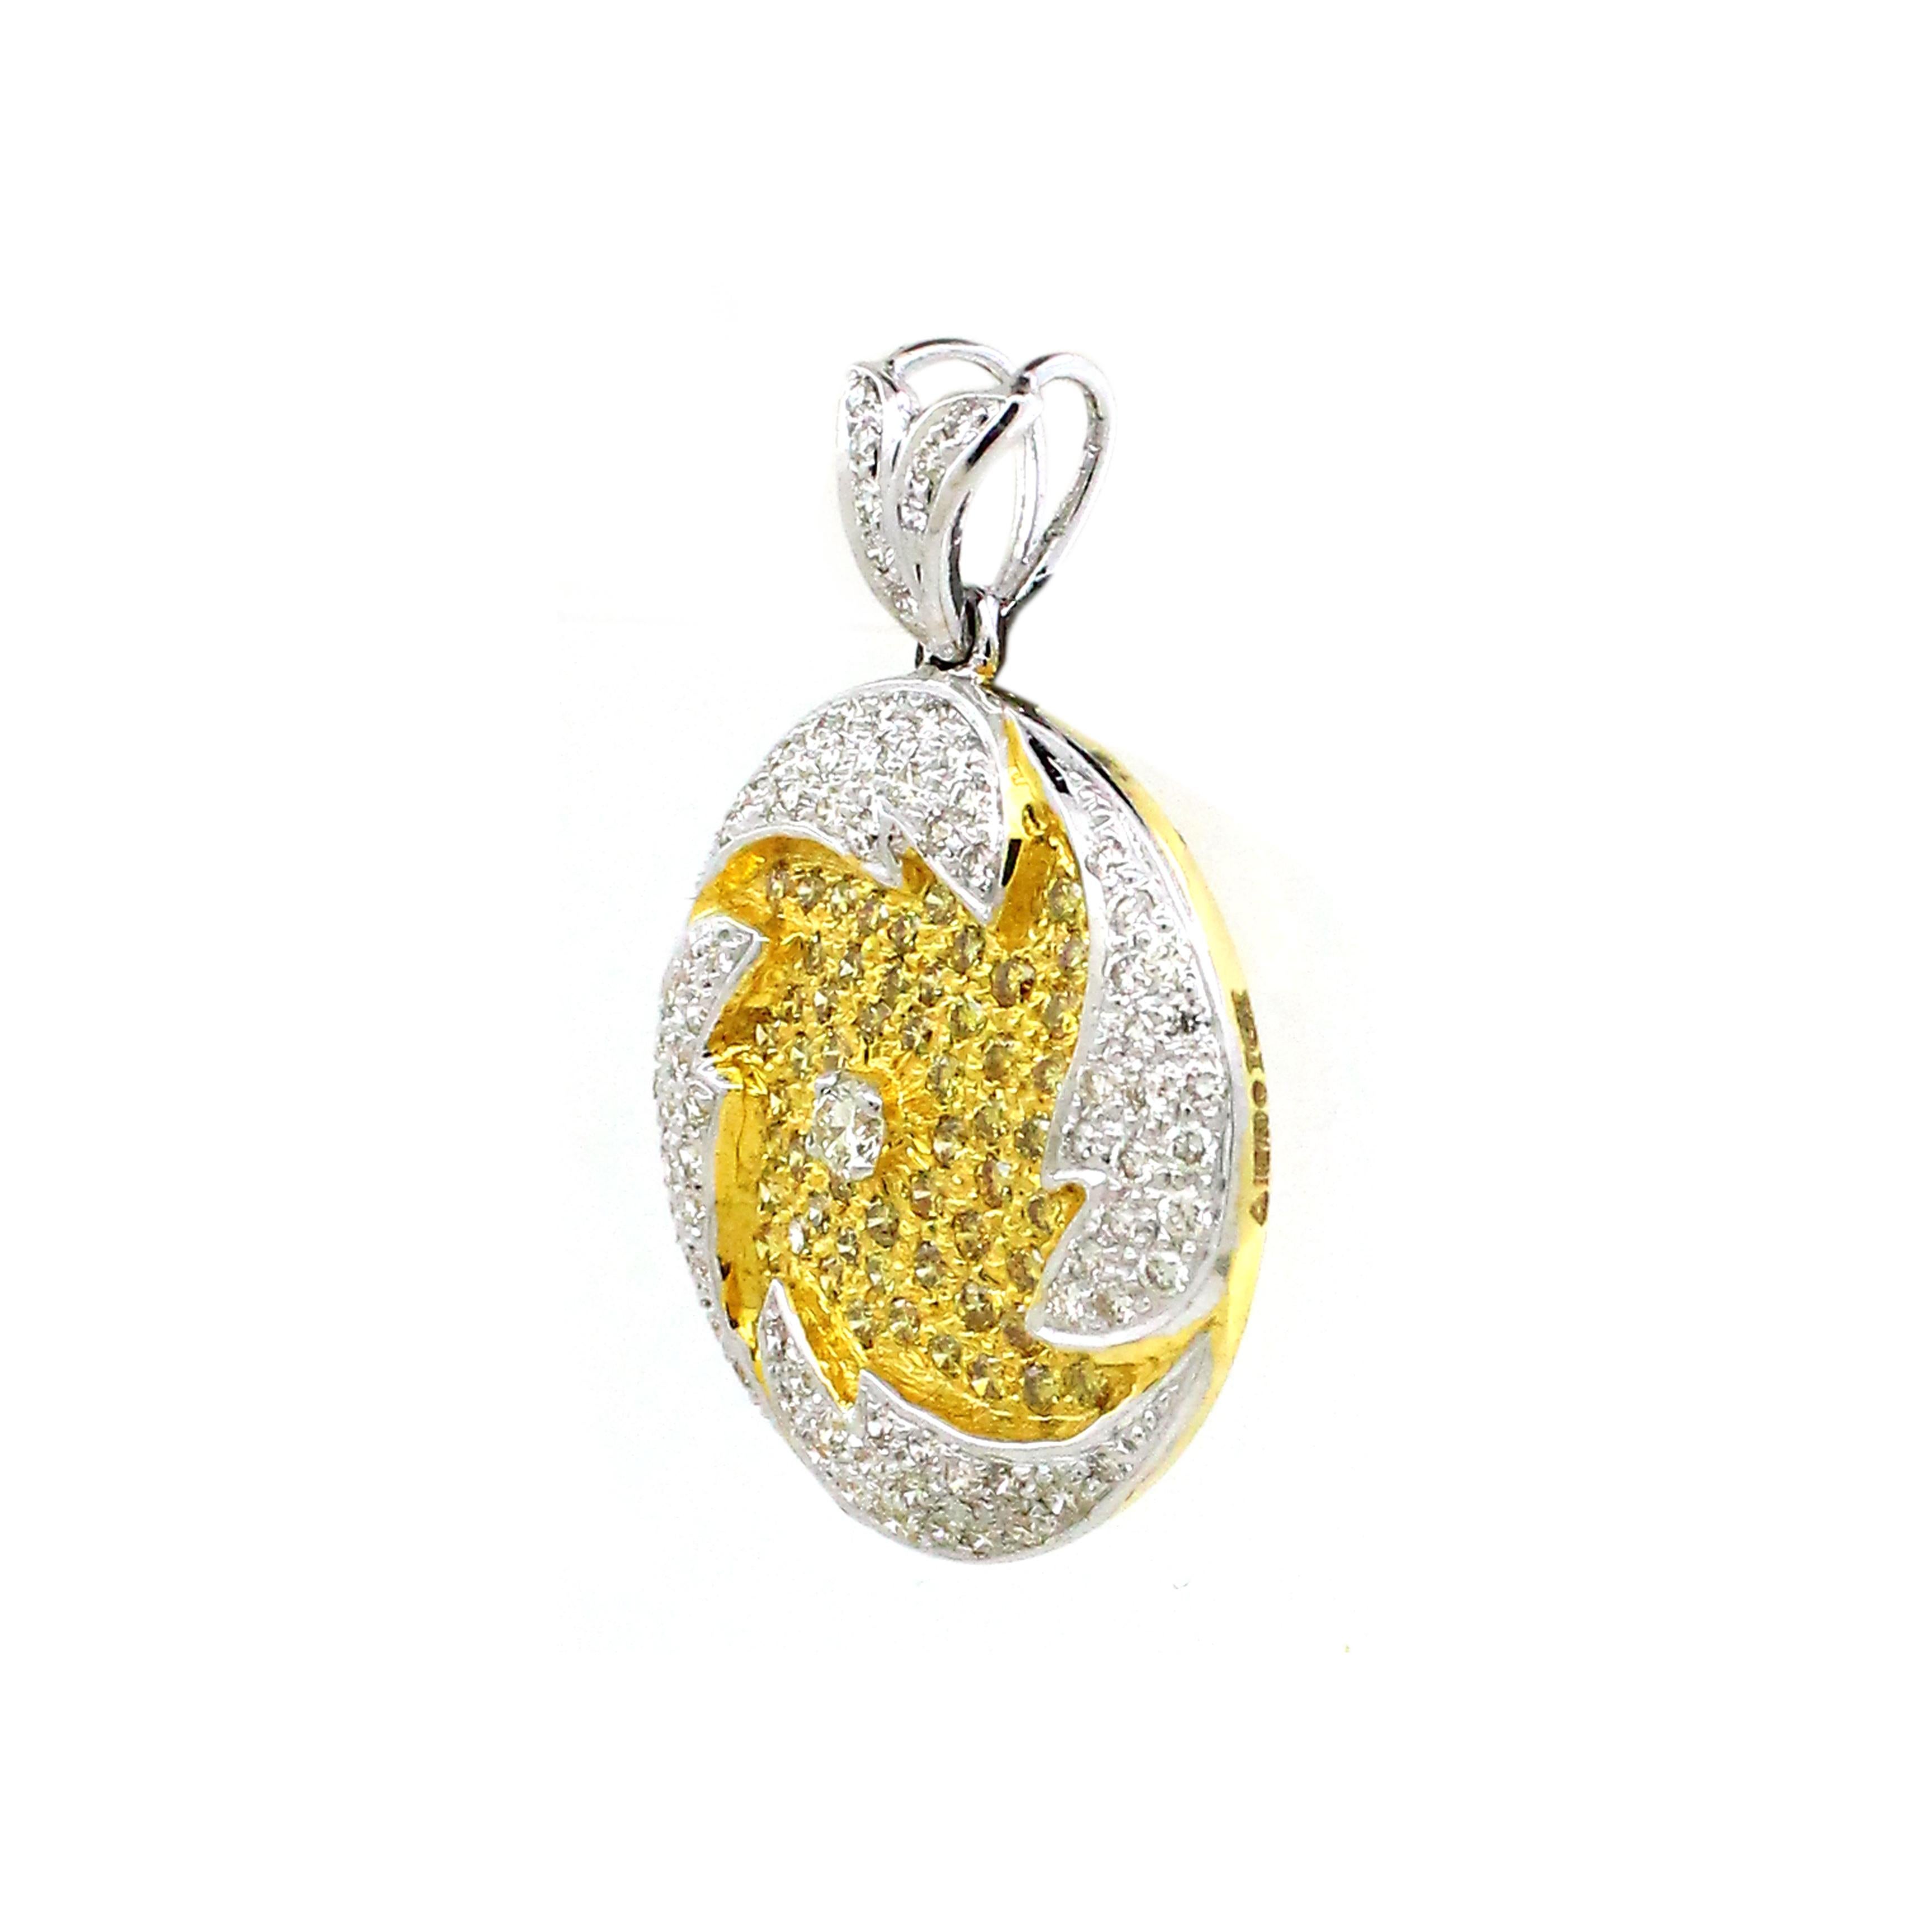 Introducing our stunning Fire Goblet-inspired pendant, a mesmerizing blend of elegance and fiery allure crafted for all. Crafted with meticulous detail in 18k white and yellow gold, this pendant captivates with its radiant design. The centerpiece